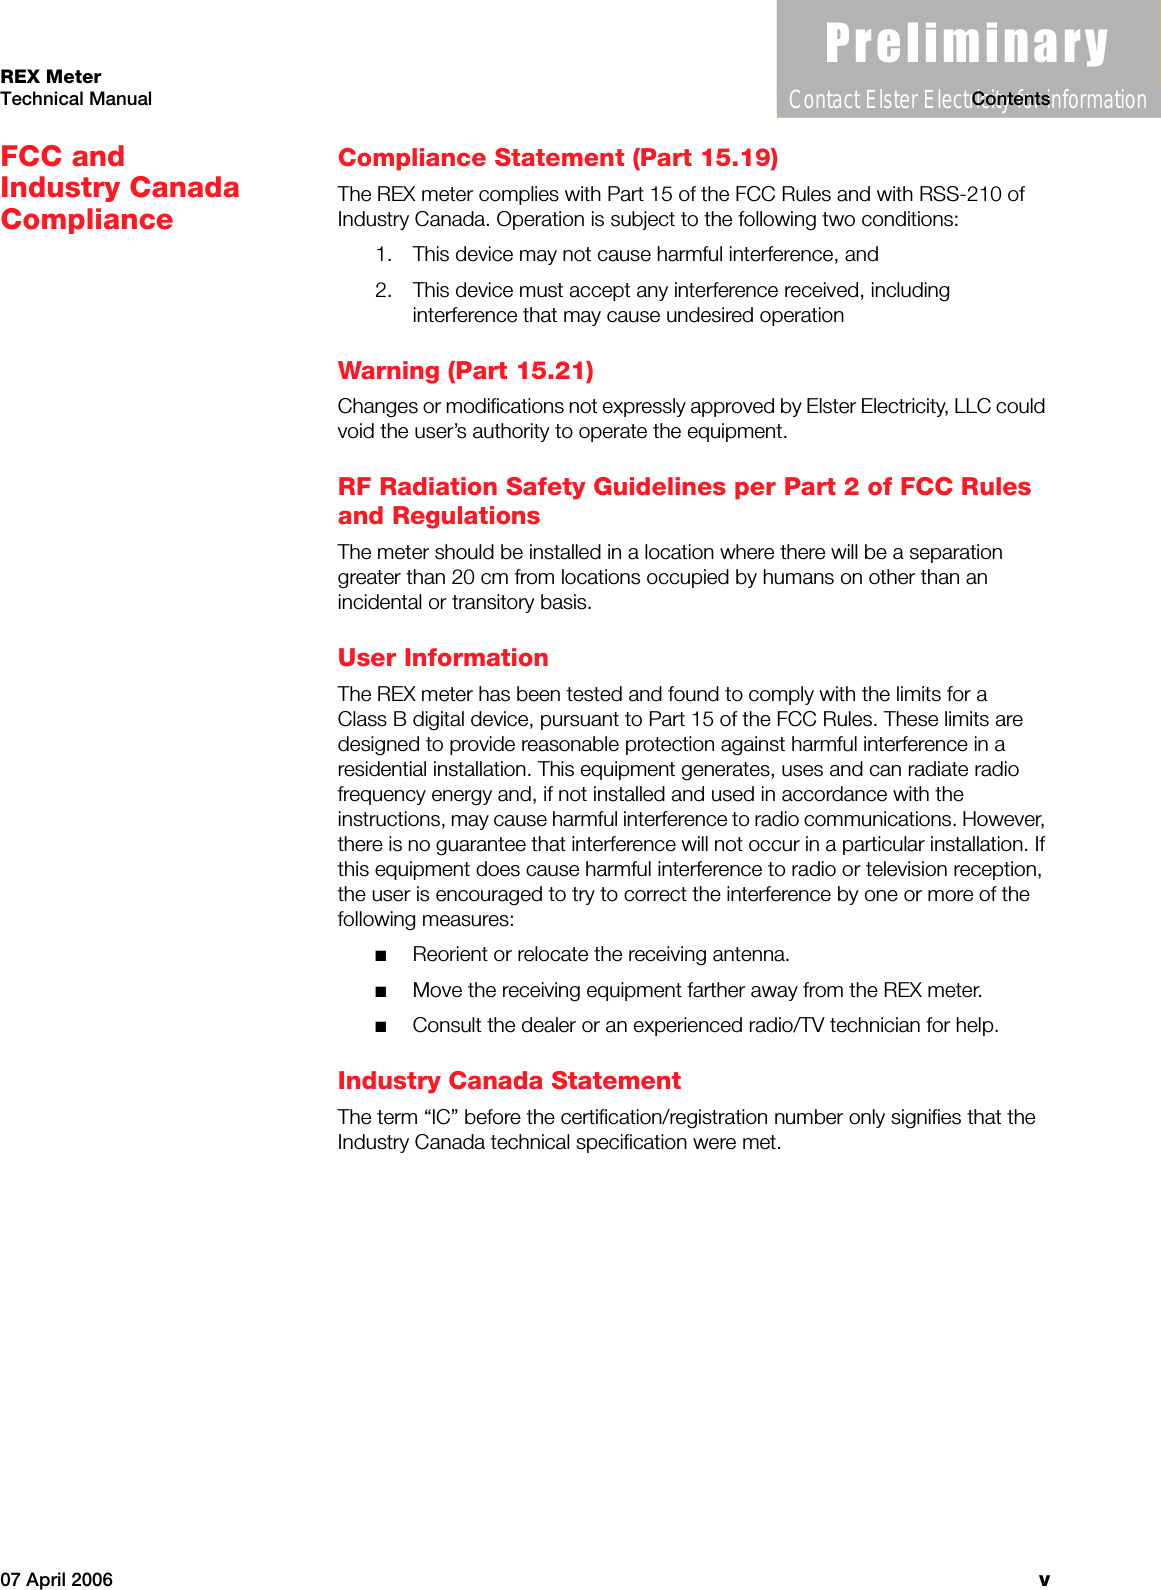 3UHOLPLQDU\Contact Elster Electricity for information07 April 2006 vREX MeterTechnical Manual ContentsFCC and Industry Canada ComplianceCompliance Statement (Part 15.19)The REX meter complies with Part 15 of the FCC Rules and with RSS-210 of Industry Canada. Operation is subject to the following two conditions:1. This device may not cause harmful interference, and2. This device must accept any interference received, including interference that may cause undesired operationWarning (Part 15.21)Changes or modifications not expressly approved by Elster Electricity, LLC could void the user’s authority to operate the equipment.RF Radiation Safety Guidelines per Part 2 of FCC Rules and RegulationsThe meter should be installed in a location where there will be a separation greater than 20 cm from locations occupied by humans on other than an incidental or transitory basis.User InformationThe REX meter has been tested and found to comply with the limits for a Class B digital device, pursuant to Part 15 of the FCC Rules. These limits are designed to provide reasonable protection against harmful interference in a residential installation. This equipment generates, uses and can radiate radio frequency energy and, if not installed and used in accordance with the instructions, may cause harmful interference to radio communications. However, there is no guarantee that interference will not occur in a particular installation. If this equipment does cause harmful interference to radio or television reception, the user is encouraged to try to correct the interference by one or more of the following measures:■Reorient or relocate the receiving antenna.■Move the receiving equipment farther away from the REX meter.■Consult the dealer or an experienced radio/TV technician for help.Industry Canada StatementThe term “IC” before the certification/registration number only signifies that the Industry Canada technical specification were met.Technical ManualREX Meter